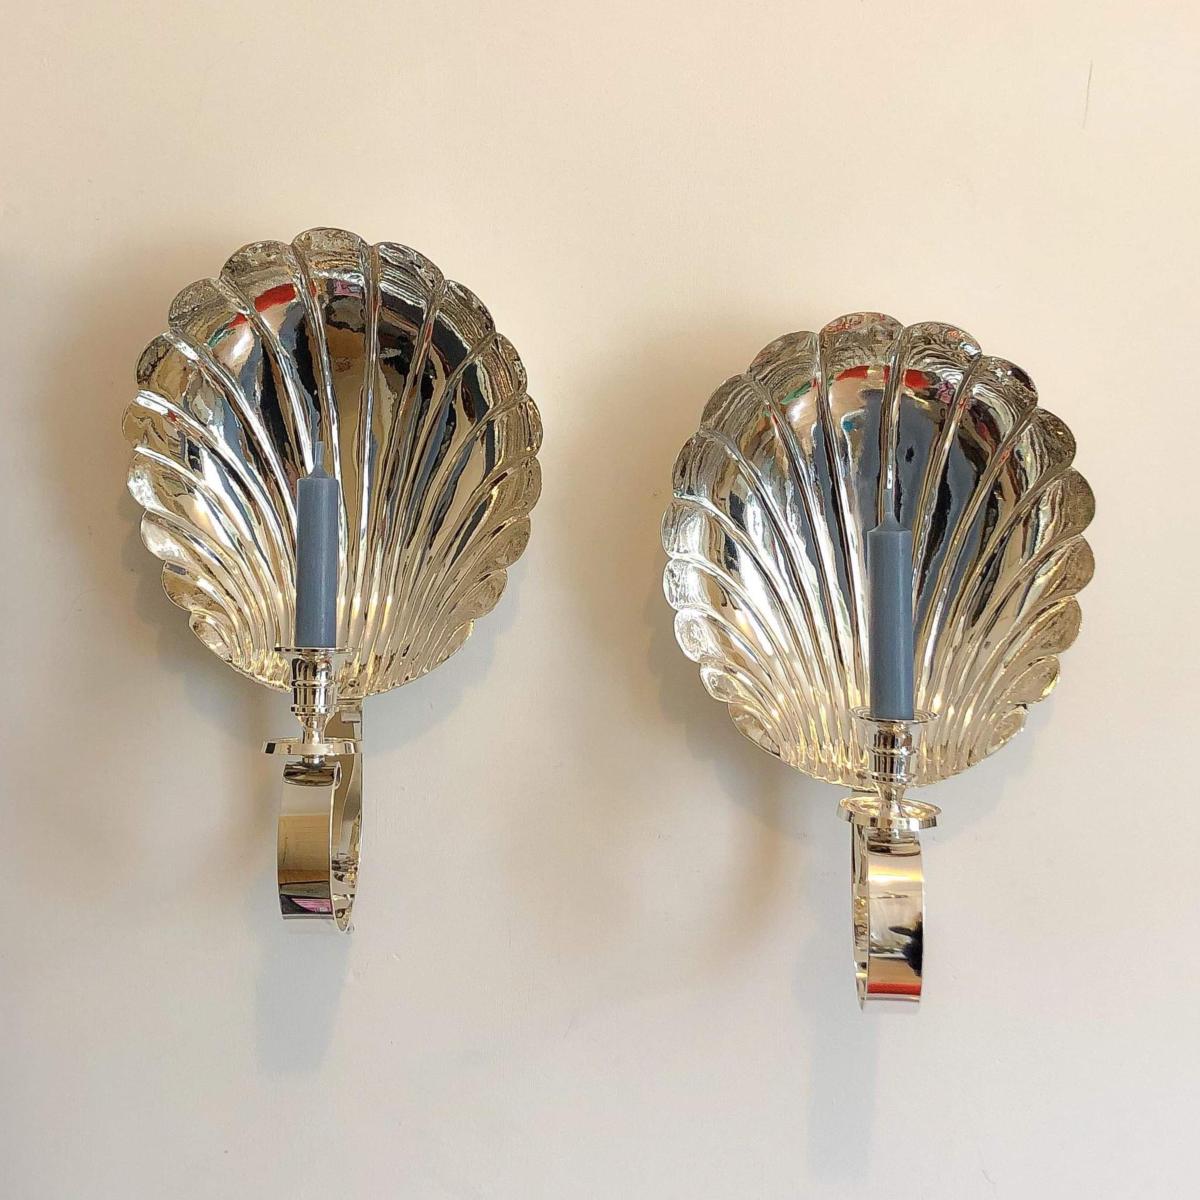 Offer. Pair, Medium  Silver plated Scallop Shell candle sconce